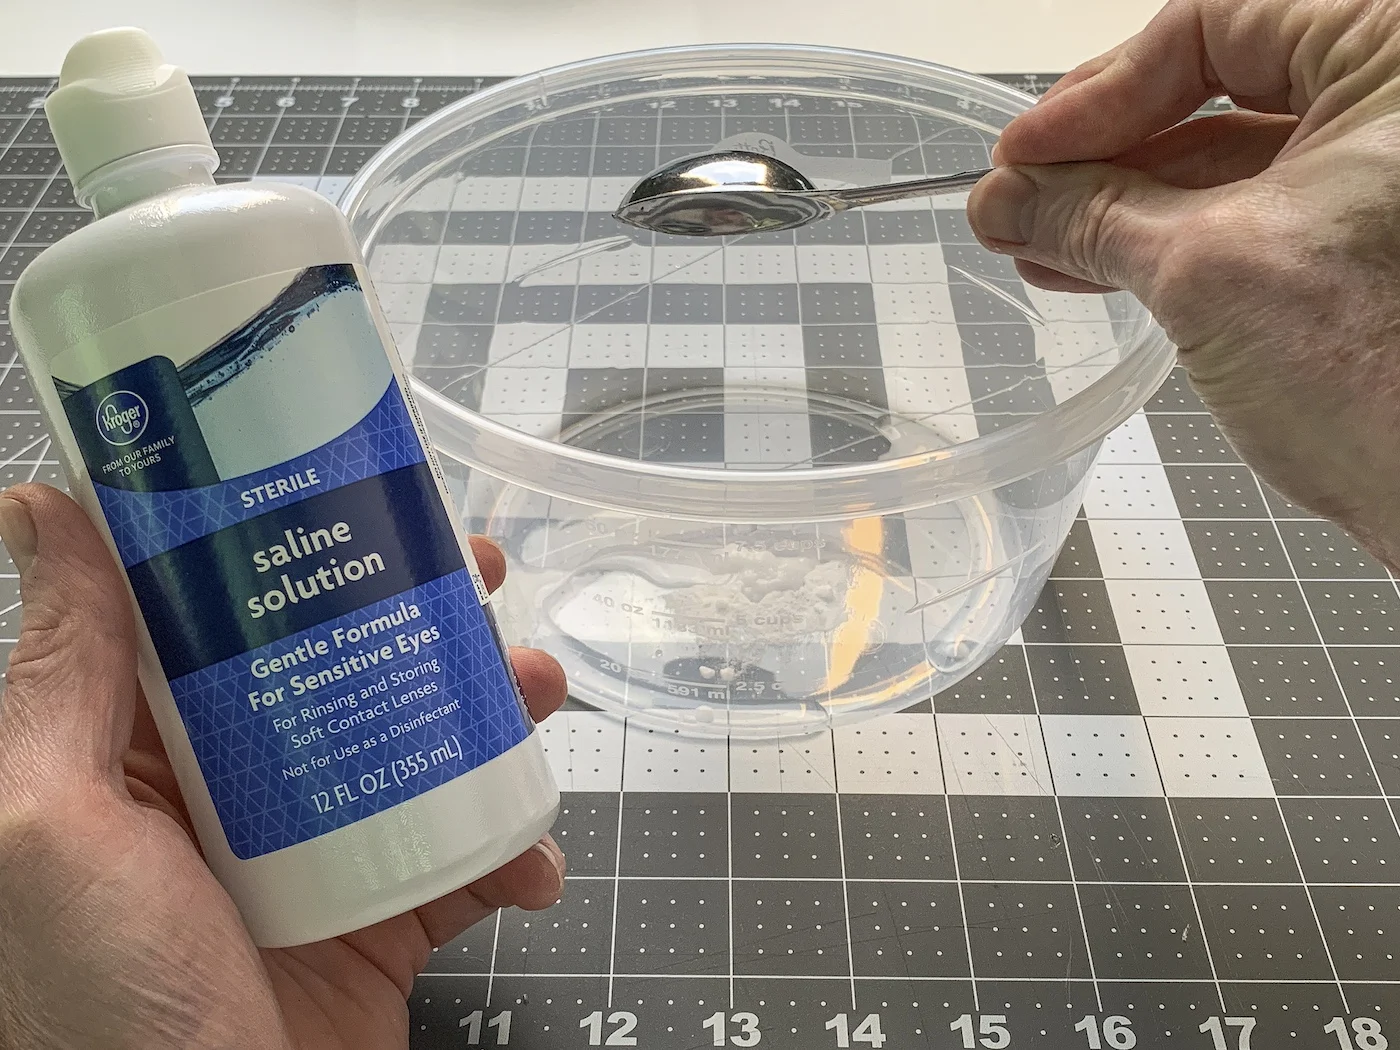 Adding the contact lens solution to the container